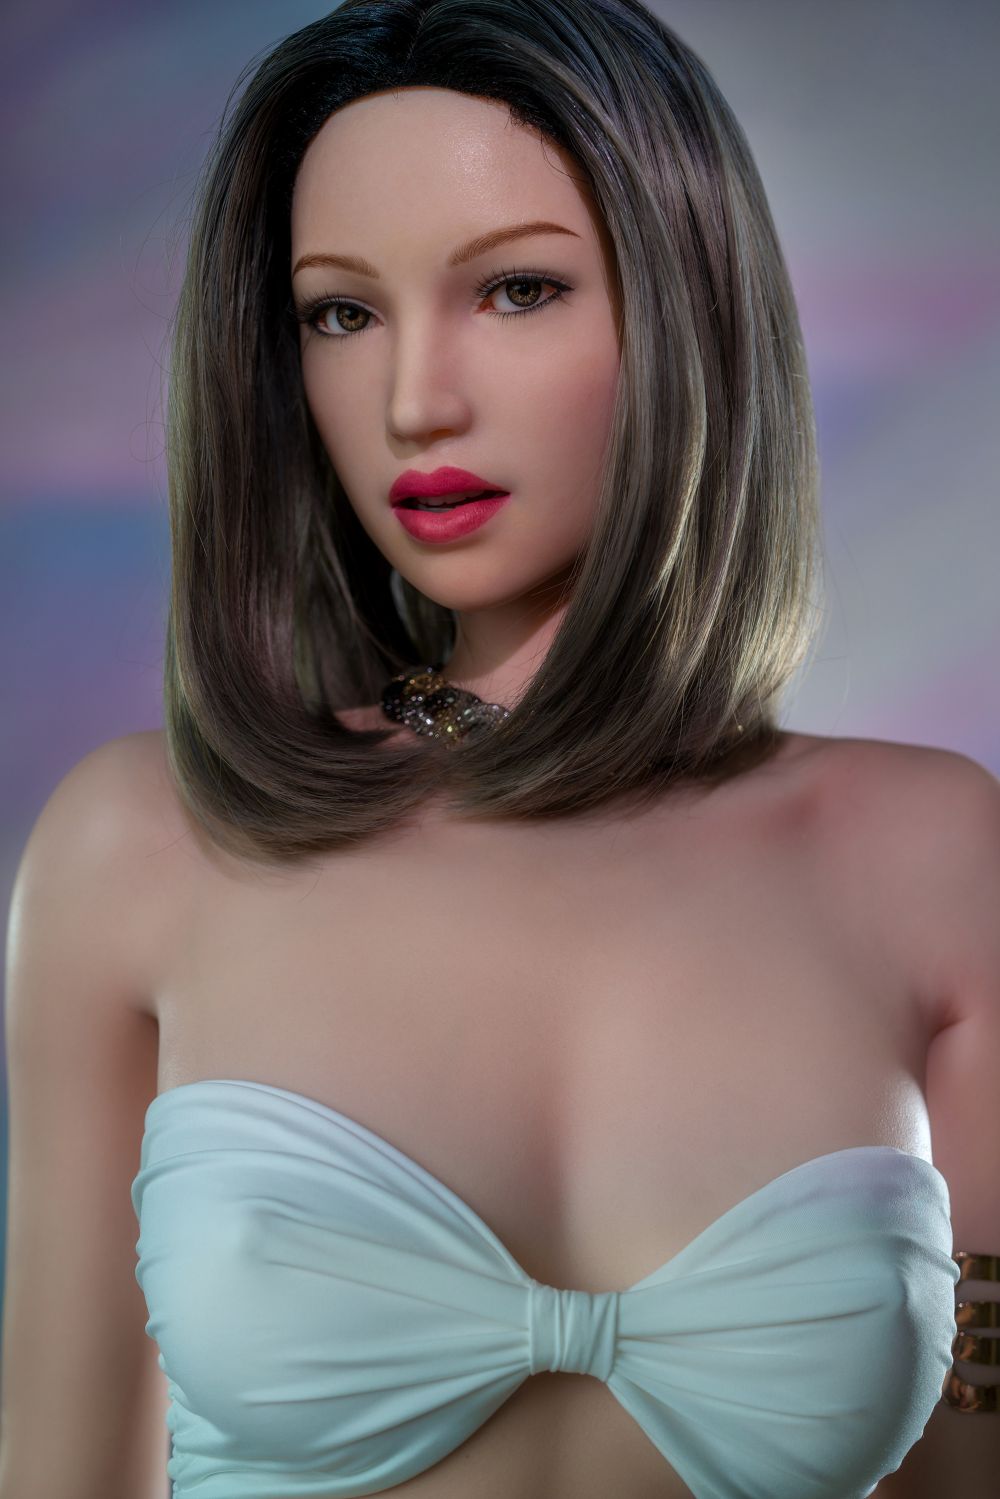 ZELEX® Inspiration Series Jennifer 175cm(5.8') GE116#-1 E-CUP Full Silicon (NO.2888)-DreamLoveDoll